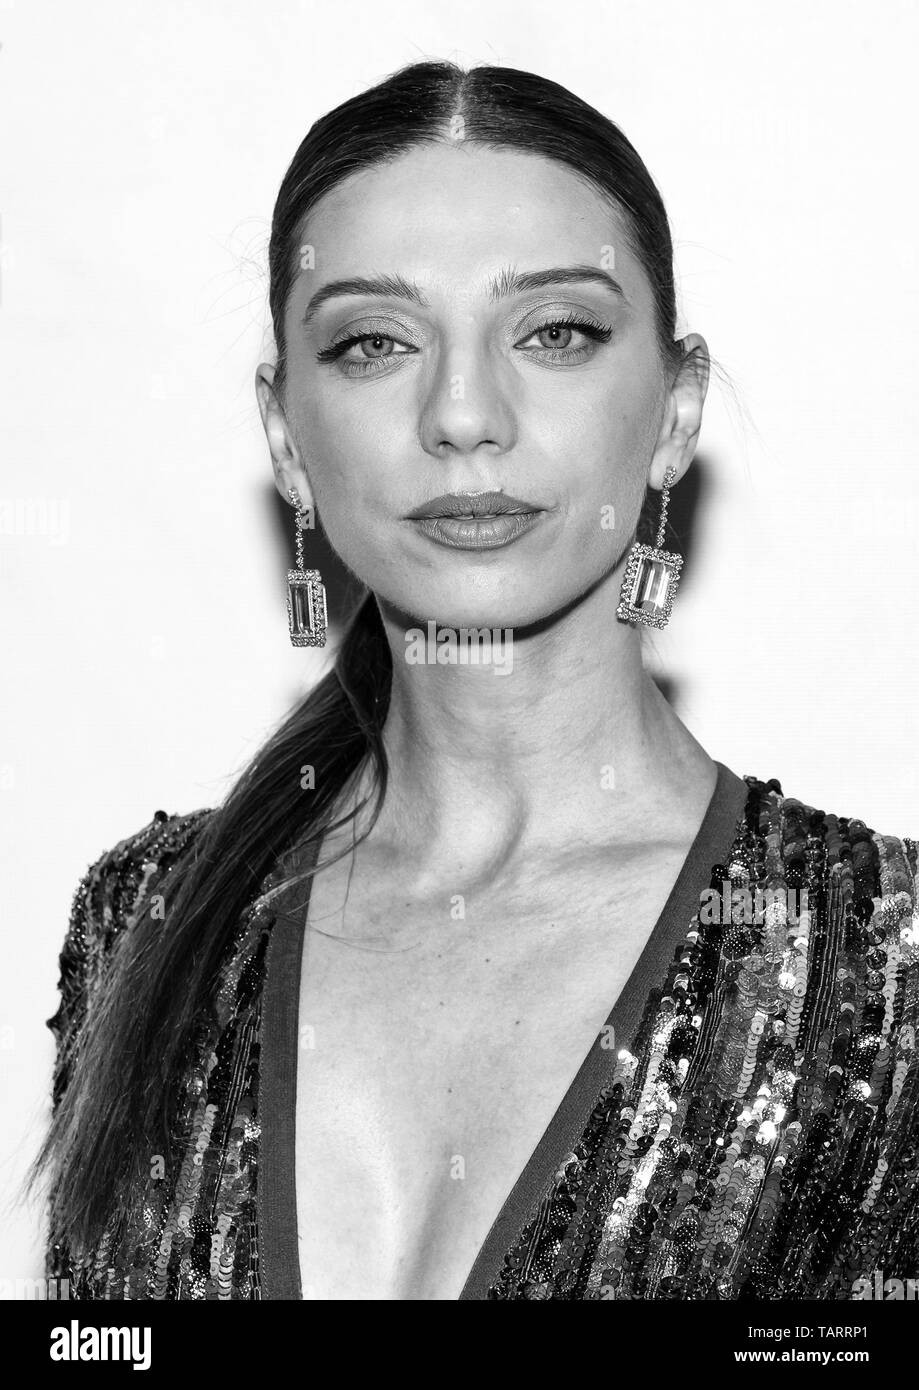 New York, NY - May 02, 2019: Angela Sarafyan wearing dress by Elie Saab attends premiere of Extremely Wicked, Shockingly Evil and Vile movie during Tr Stock Photo